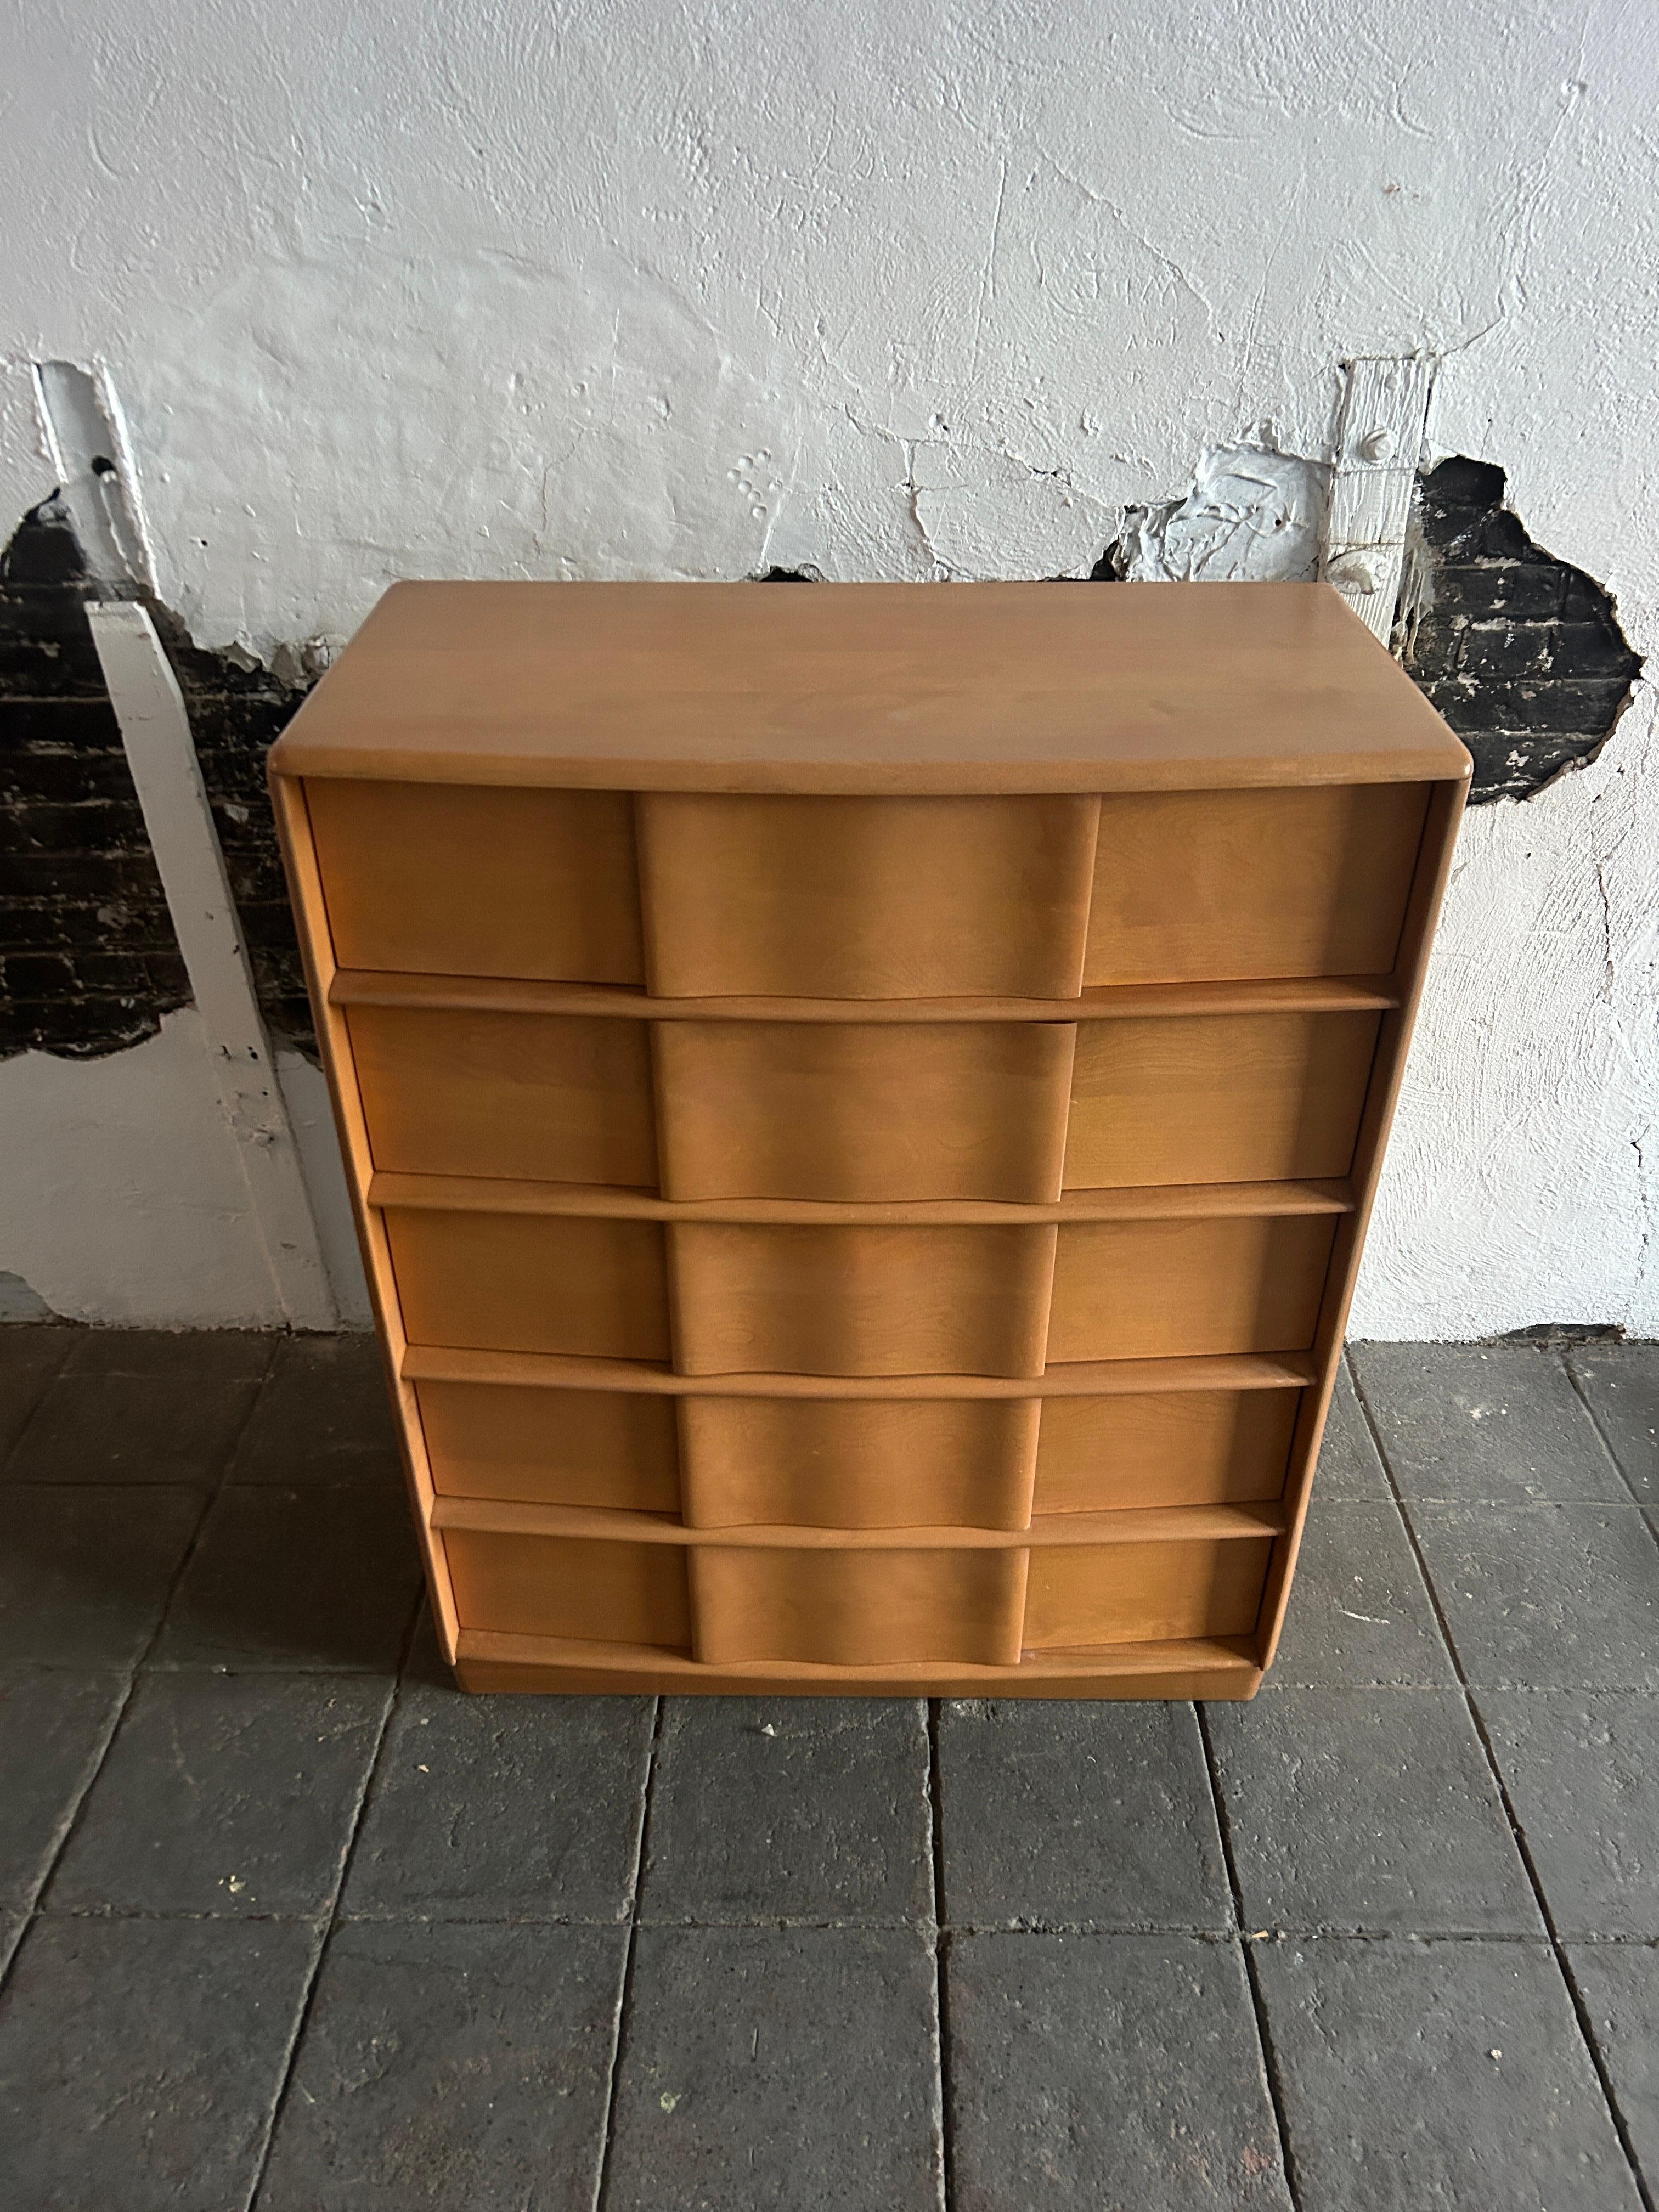 Timeless Heywood Wakefield Mid-Century Modern 5 drawer tall dresser. All solid maple construction with sculpted legs and drawer handles. Good vintage condition original blonde finish clean inside and out. Circa 1950 - Located in Brooklyn